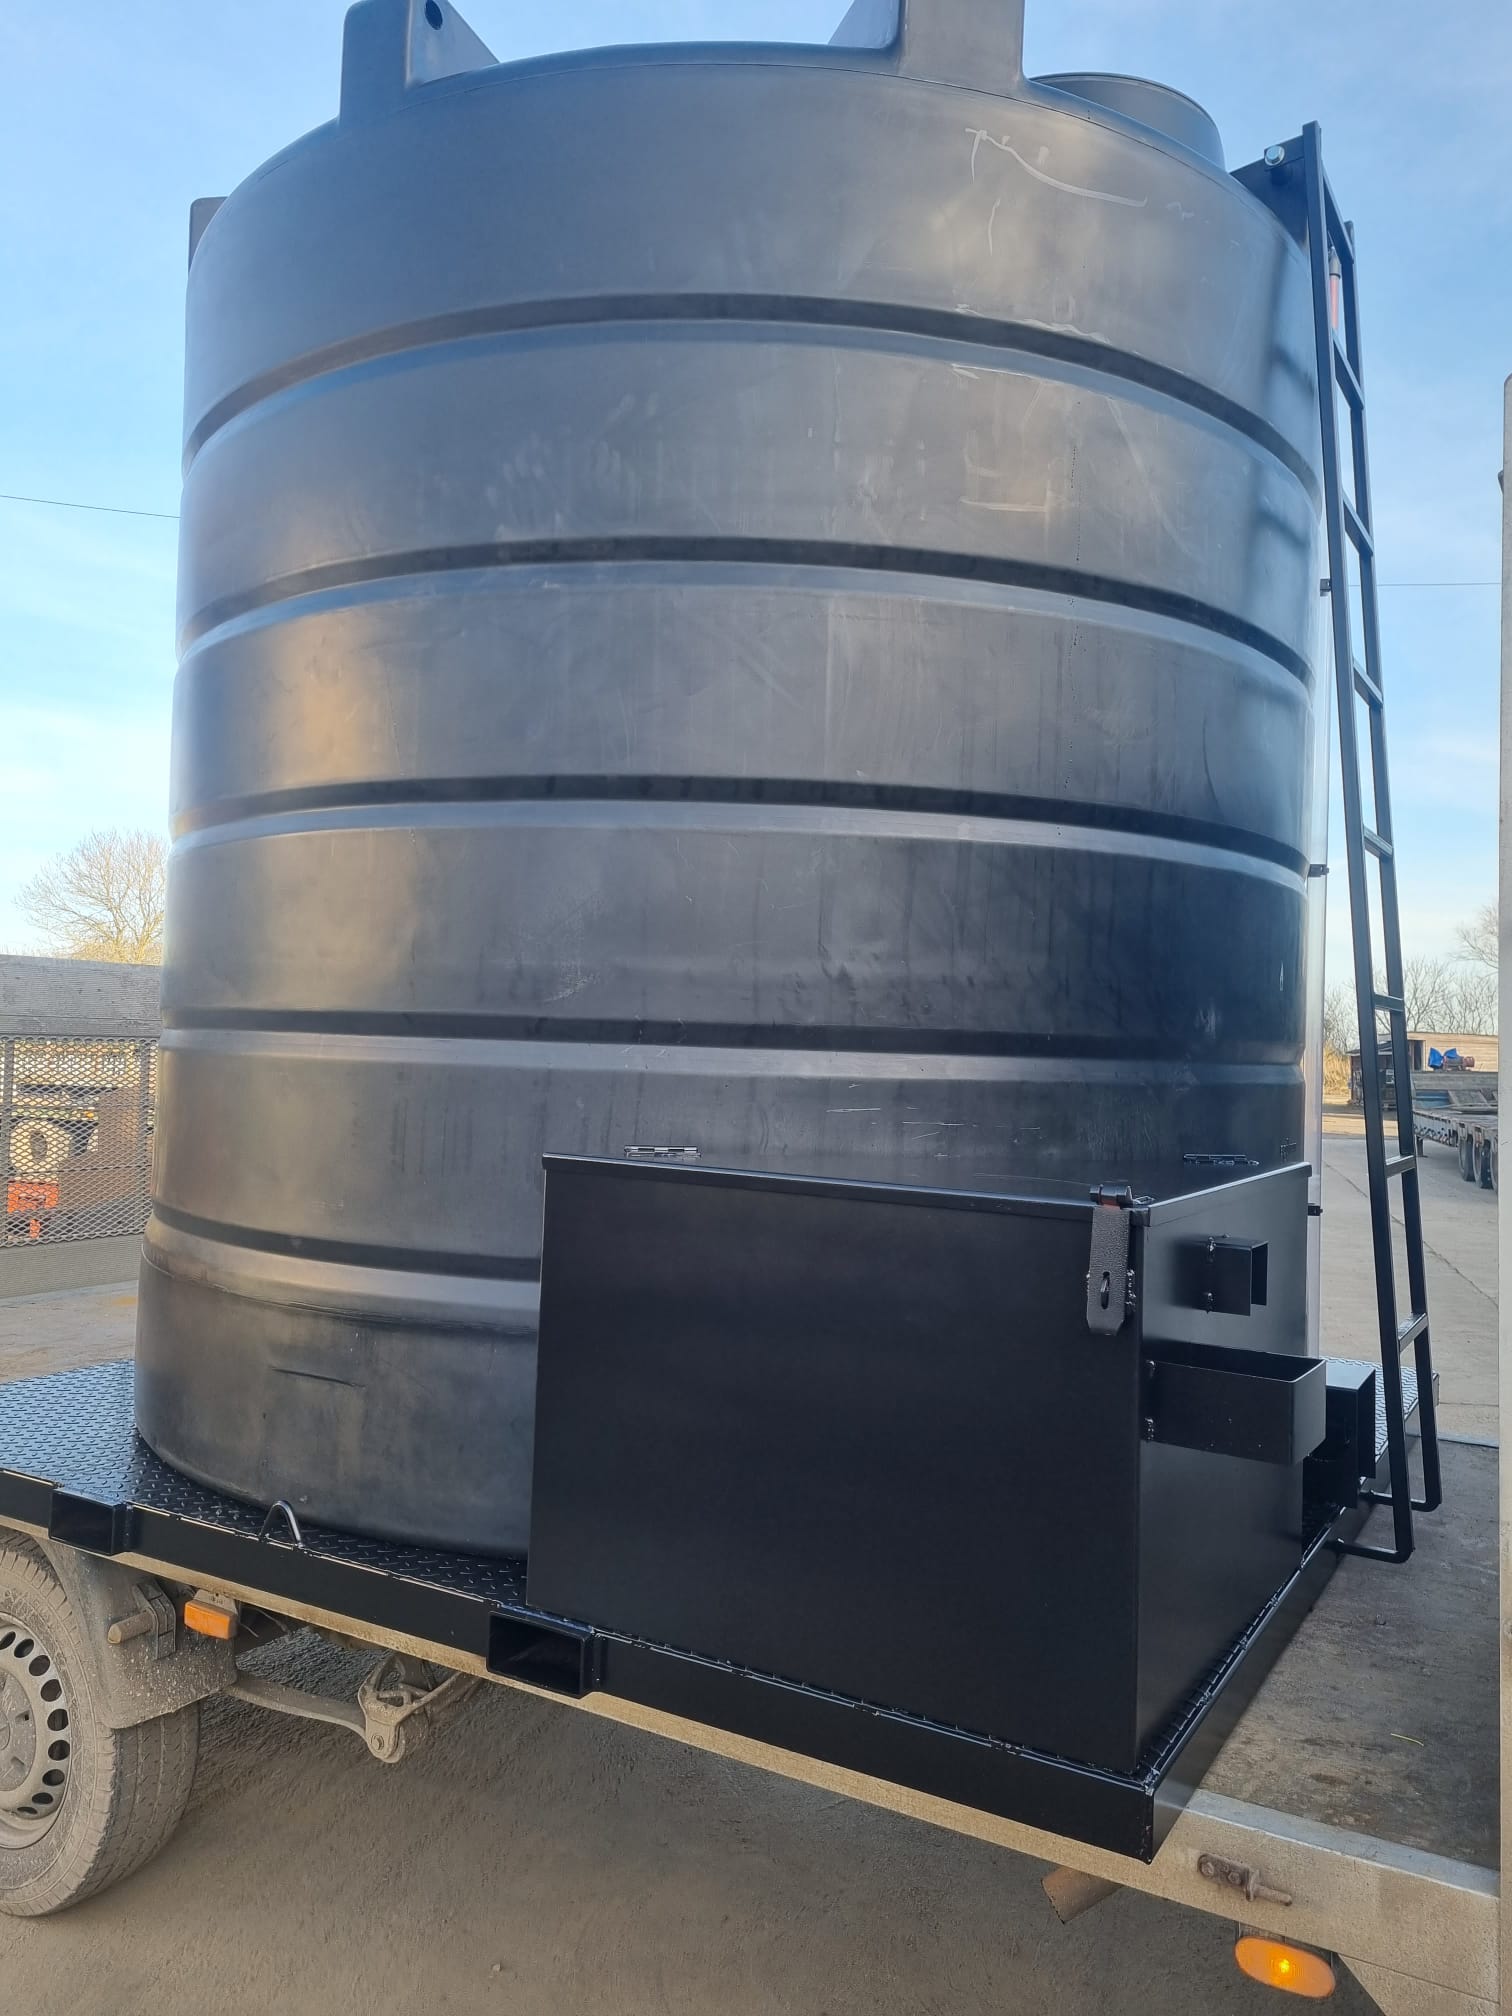 10,000ltr Water Tank, With On Demand Pump To Hire In Cambridge